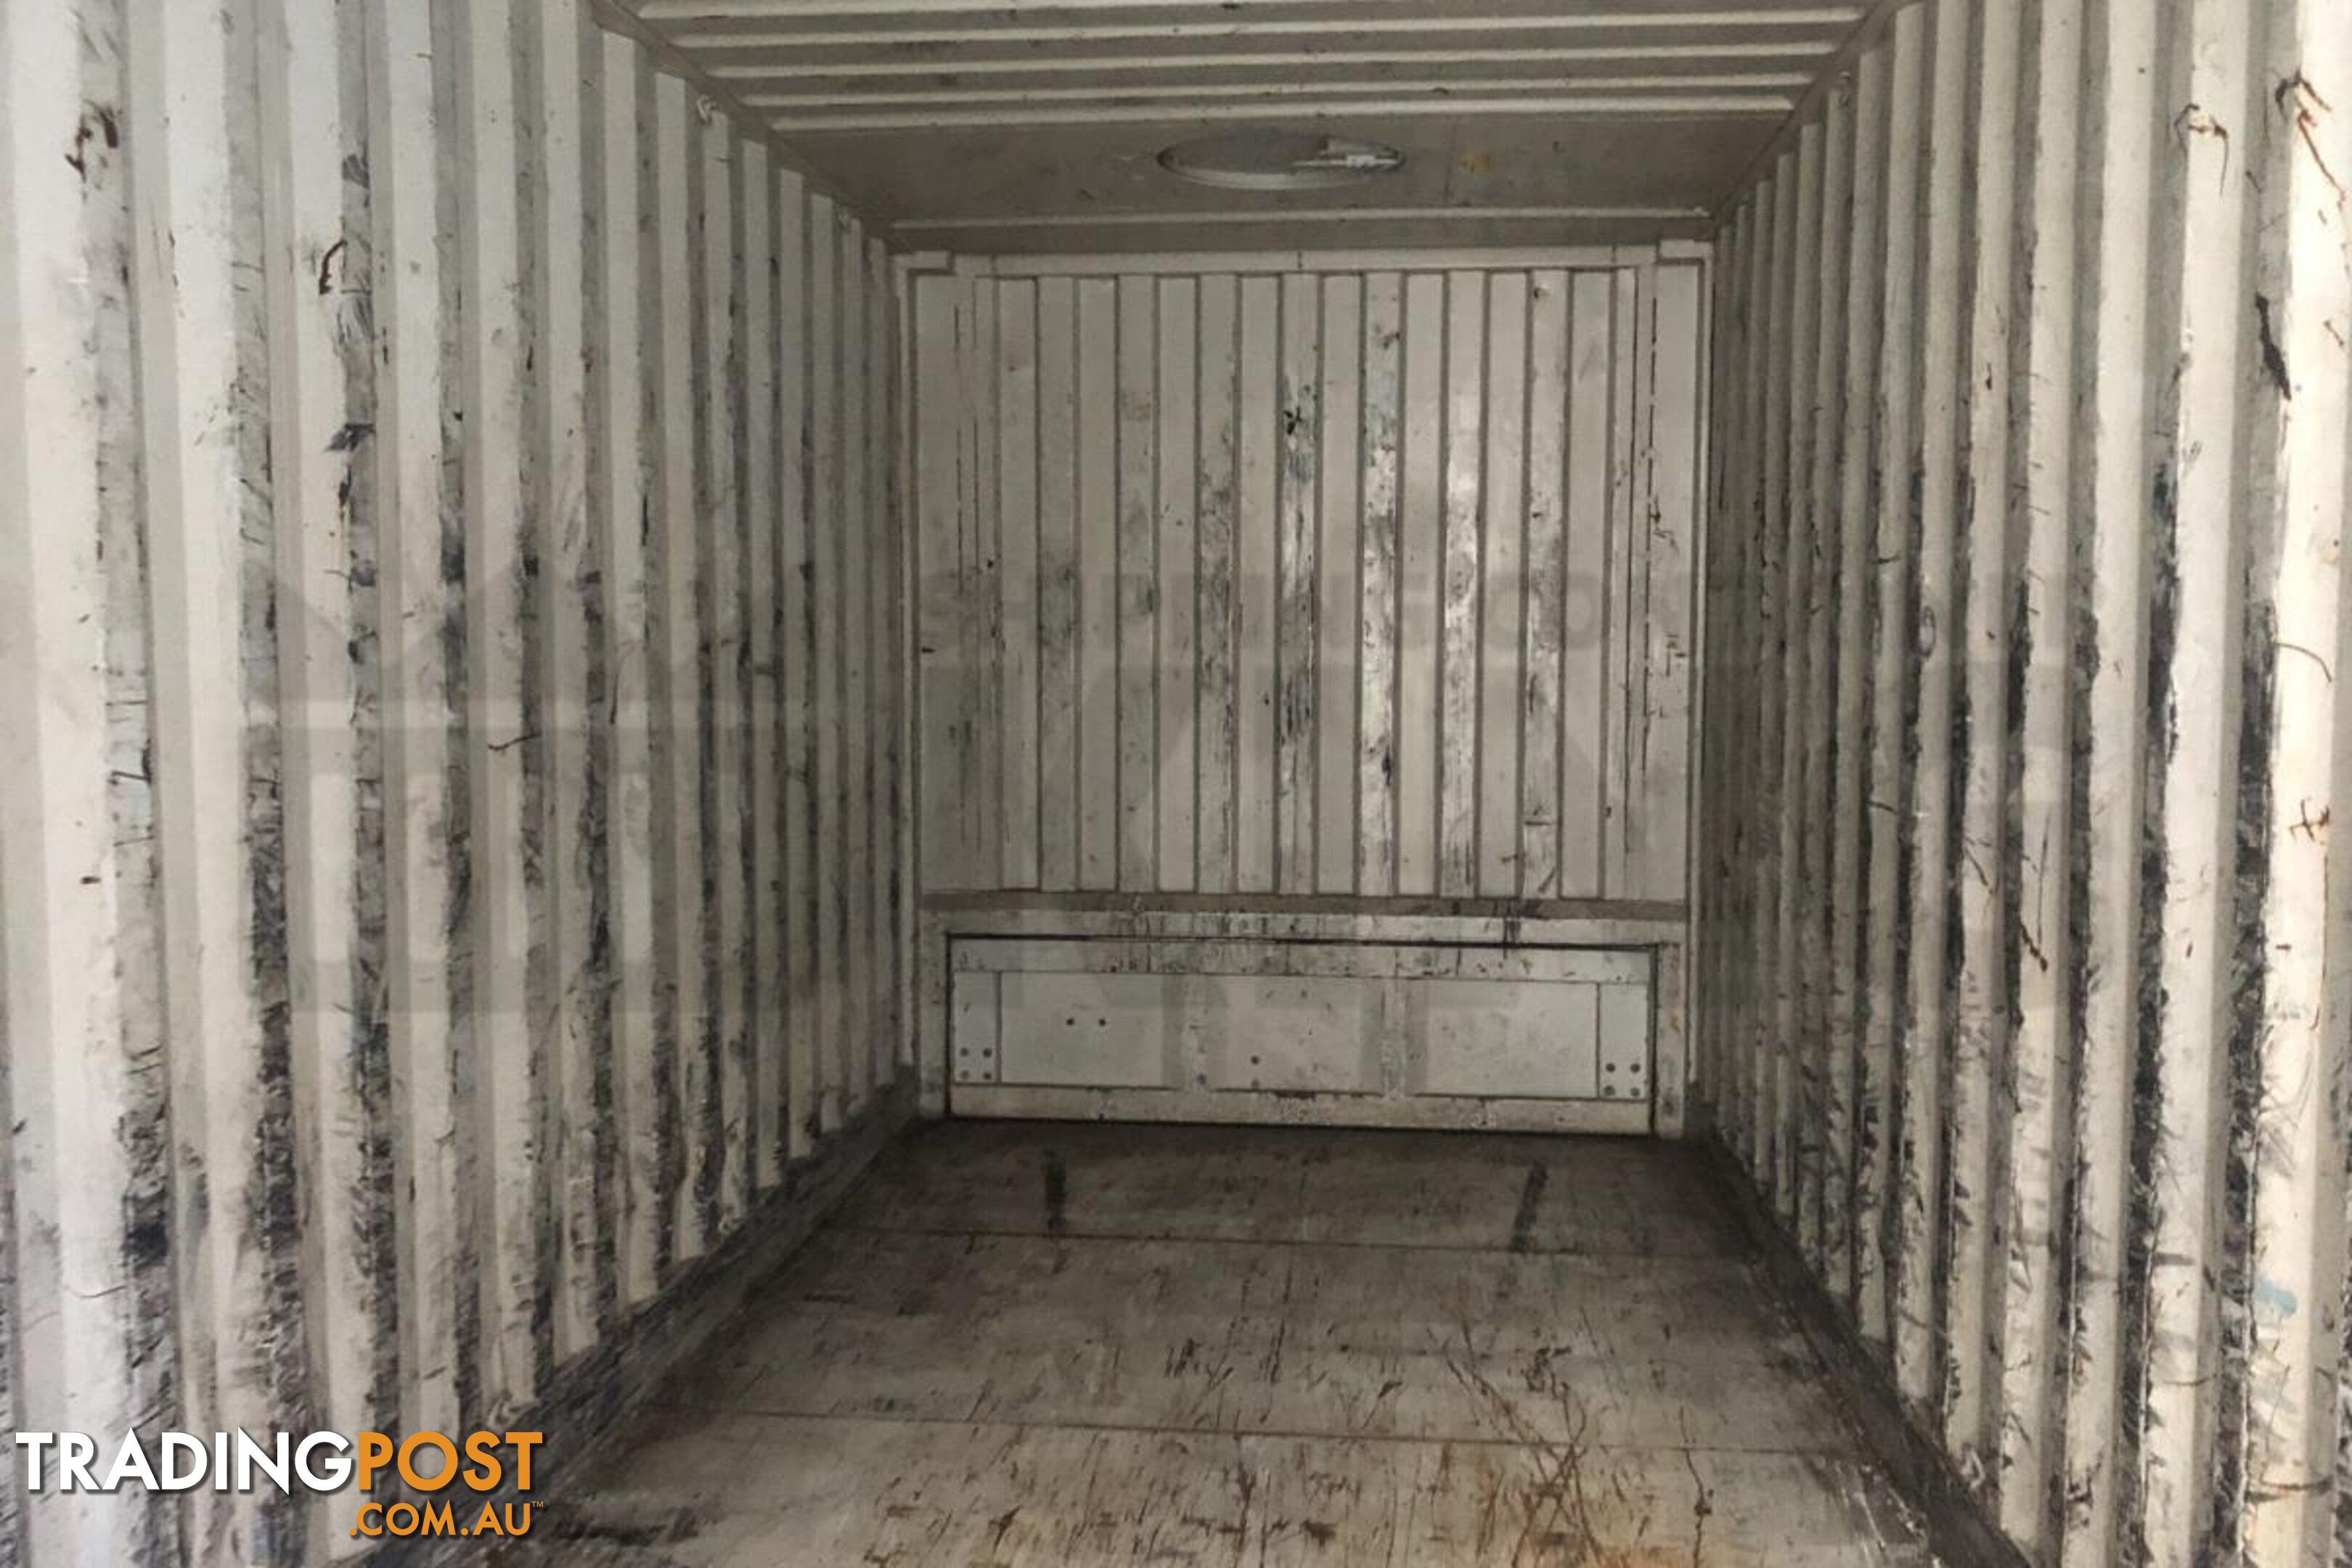 20' HIGH CUBE BULKER SHIPPING CONTAINER (STEEL FLOOR WITH ROOF HATCHES, 2 PALLETS WIDE) - in Rockhampton